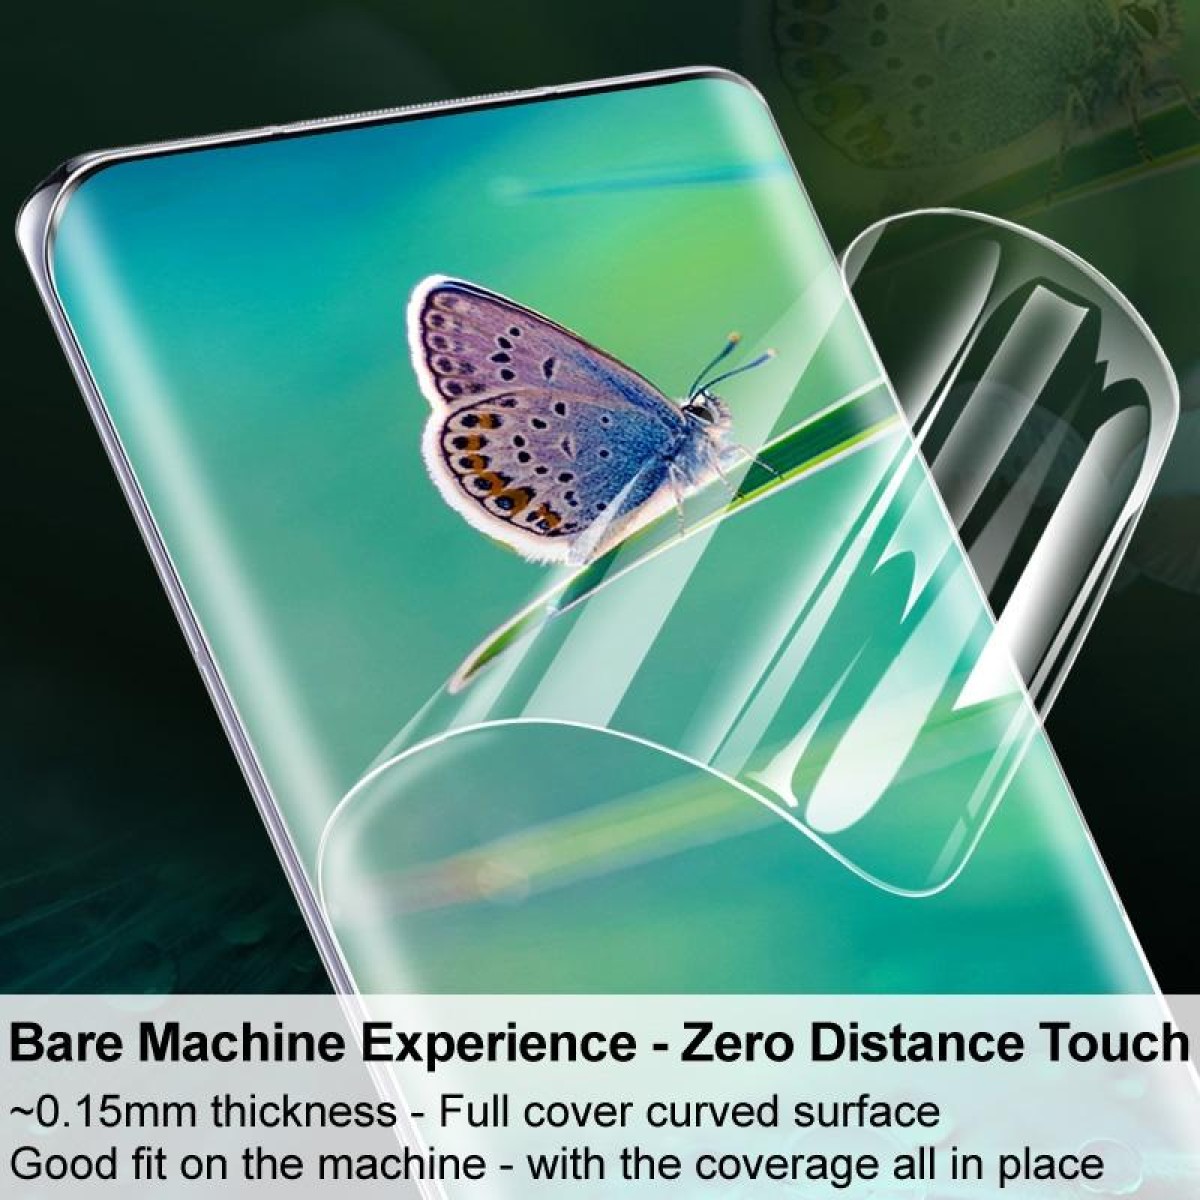 For OPPO Find X6 Pro 5G 2pcs imak Curved Full Screen Hydrogel Film Protector